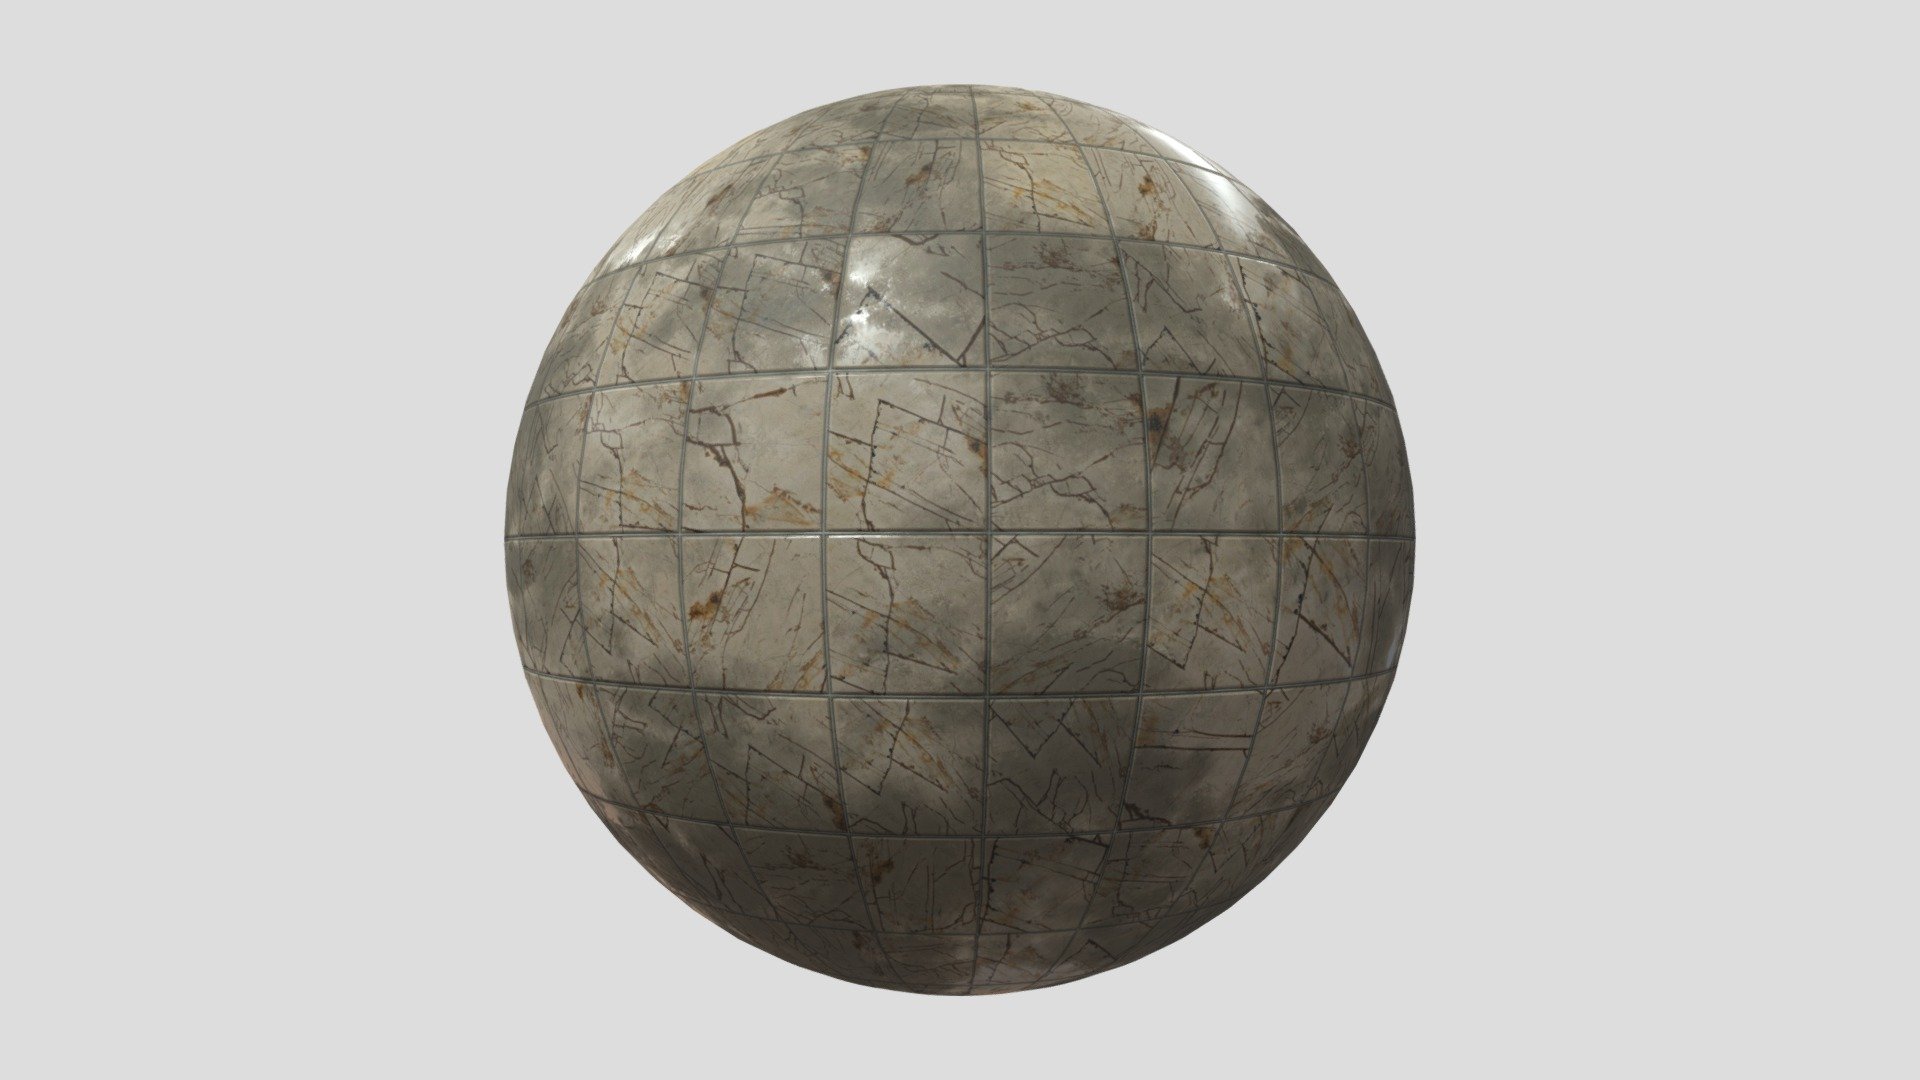 *Features:




PBR Both Standards (Metal/Rough &amp; Spec/Gloss)

4K Resolution (4096 x 4096 px)

Seamless (Tileable Both Direction)

Square Dimension

AAA Quality

Metal/Rough Types have 7 Channel Maps for each type (Base Color, AO, Metallic, Roughness, Normal, Height, Specular)

Spec/Gloss Version contains 6 Channel Maps for each type (Diffuse, Glossiness, Height, Normal, AO, Specular)

Real-World Scale Size is 100cm x 100cm

You could use it in any 3D Application PBR Render Engine such as V-Ray &amp; Corona, Blender, Cinema 3D &amp; Game Engines

Resources 3D models Materials Manmade 3D Coat 3ds Max After Effects Arnold Blender Cinema 4D Clip Paint DAZ Studio Illustrator Keyshot Manga Studio Mari Marmoset Marvelous Designer Maya MentalRay Modo Mudbox Nuke Corel Painter Photoshop Quixel Suite Substance Designer Substance Painter Unity Unreal Engine V-Ray ZBrush Houdini ClarisseiFX Photoshop CC Photoshop Affinity Photo Infinite Painter Rhino Revit SketchUp CGI PBR AR VR Game Ready AAA

Best Regards DATEC Studio - Floor Tile 002 V 02 PBR 4K Dirty - Buy Royalty Free 3D model by DATEC_Studio 3d model